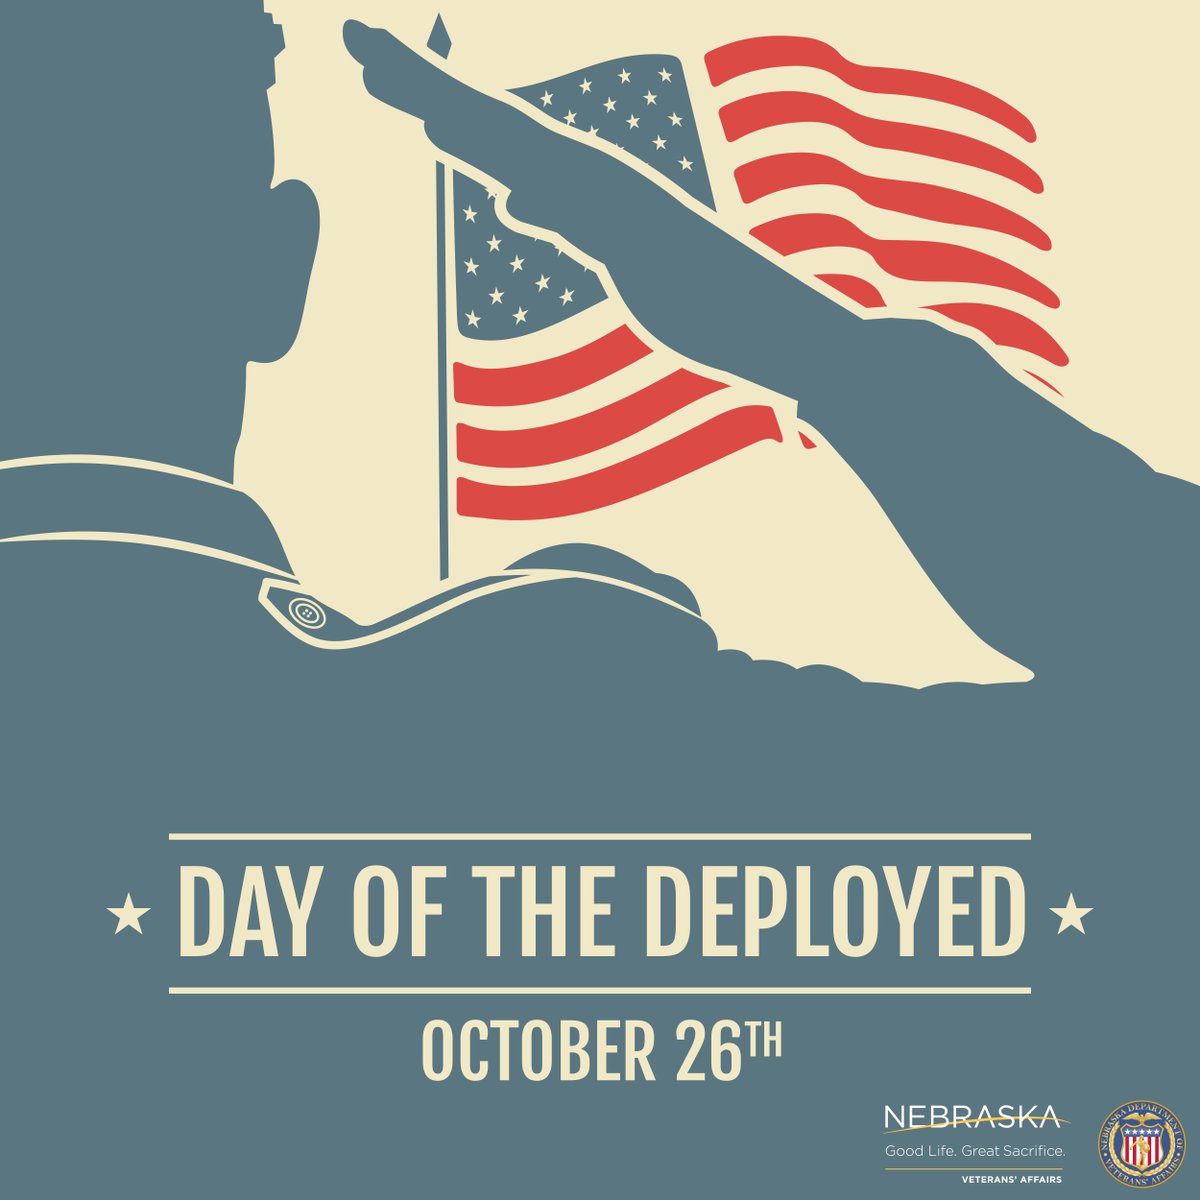 Today we honor the members of our armed forces who are currently deployed or have ever been deployed to serve our country. We also recognize their families, who make countless sacrifices while their loved ones are away. #DayoftheDeployed